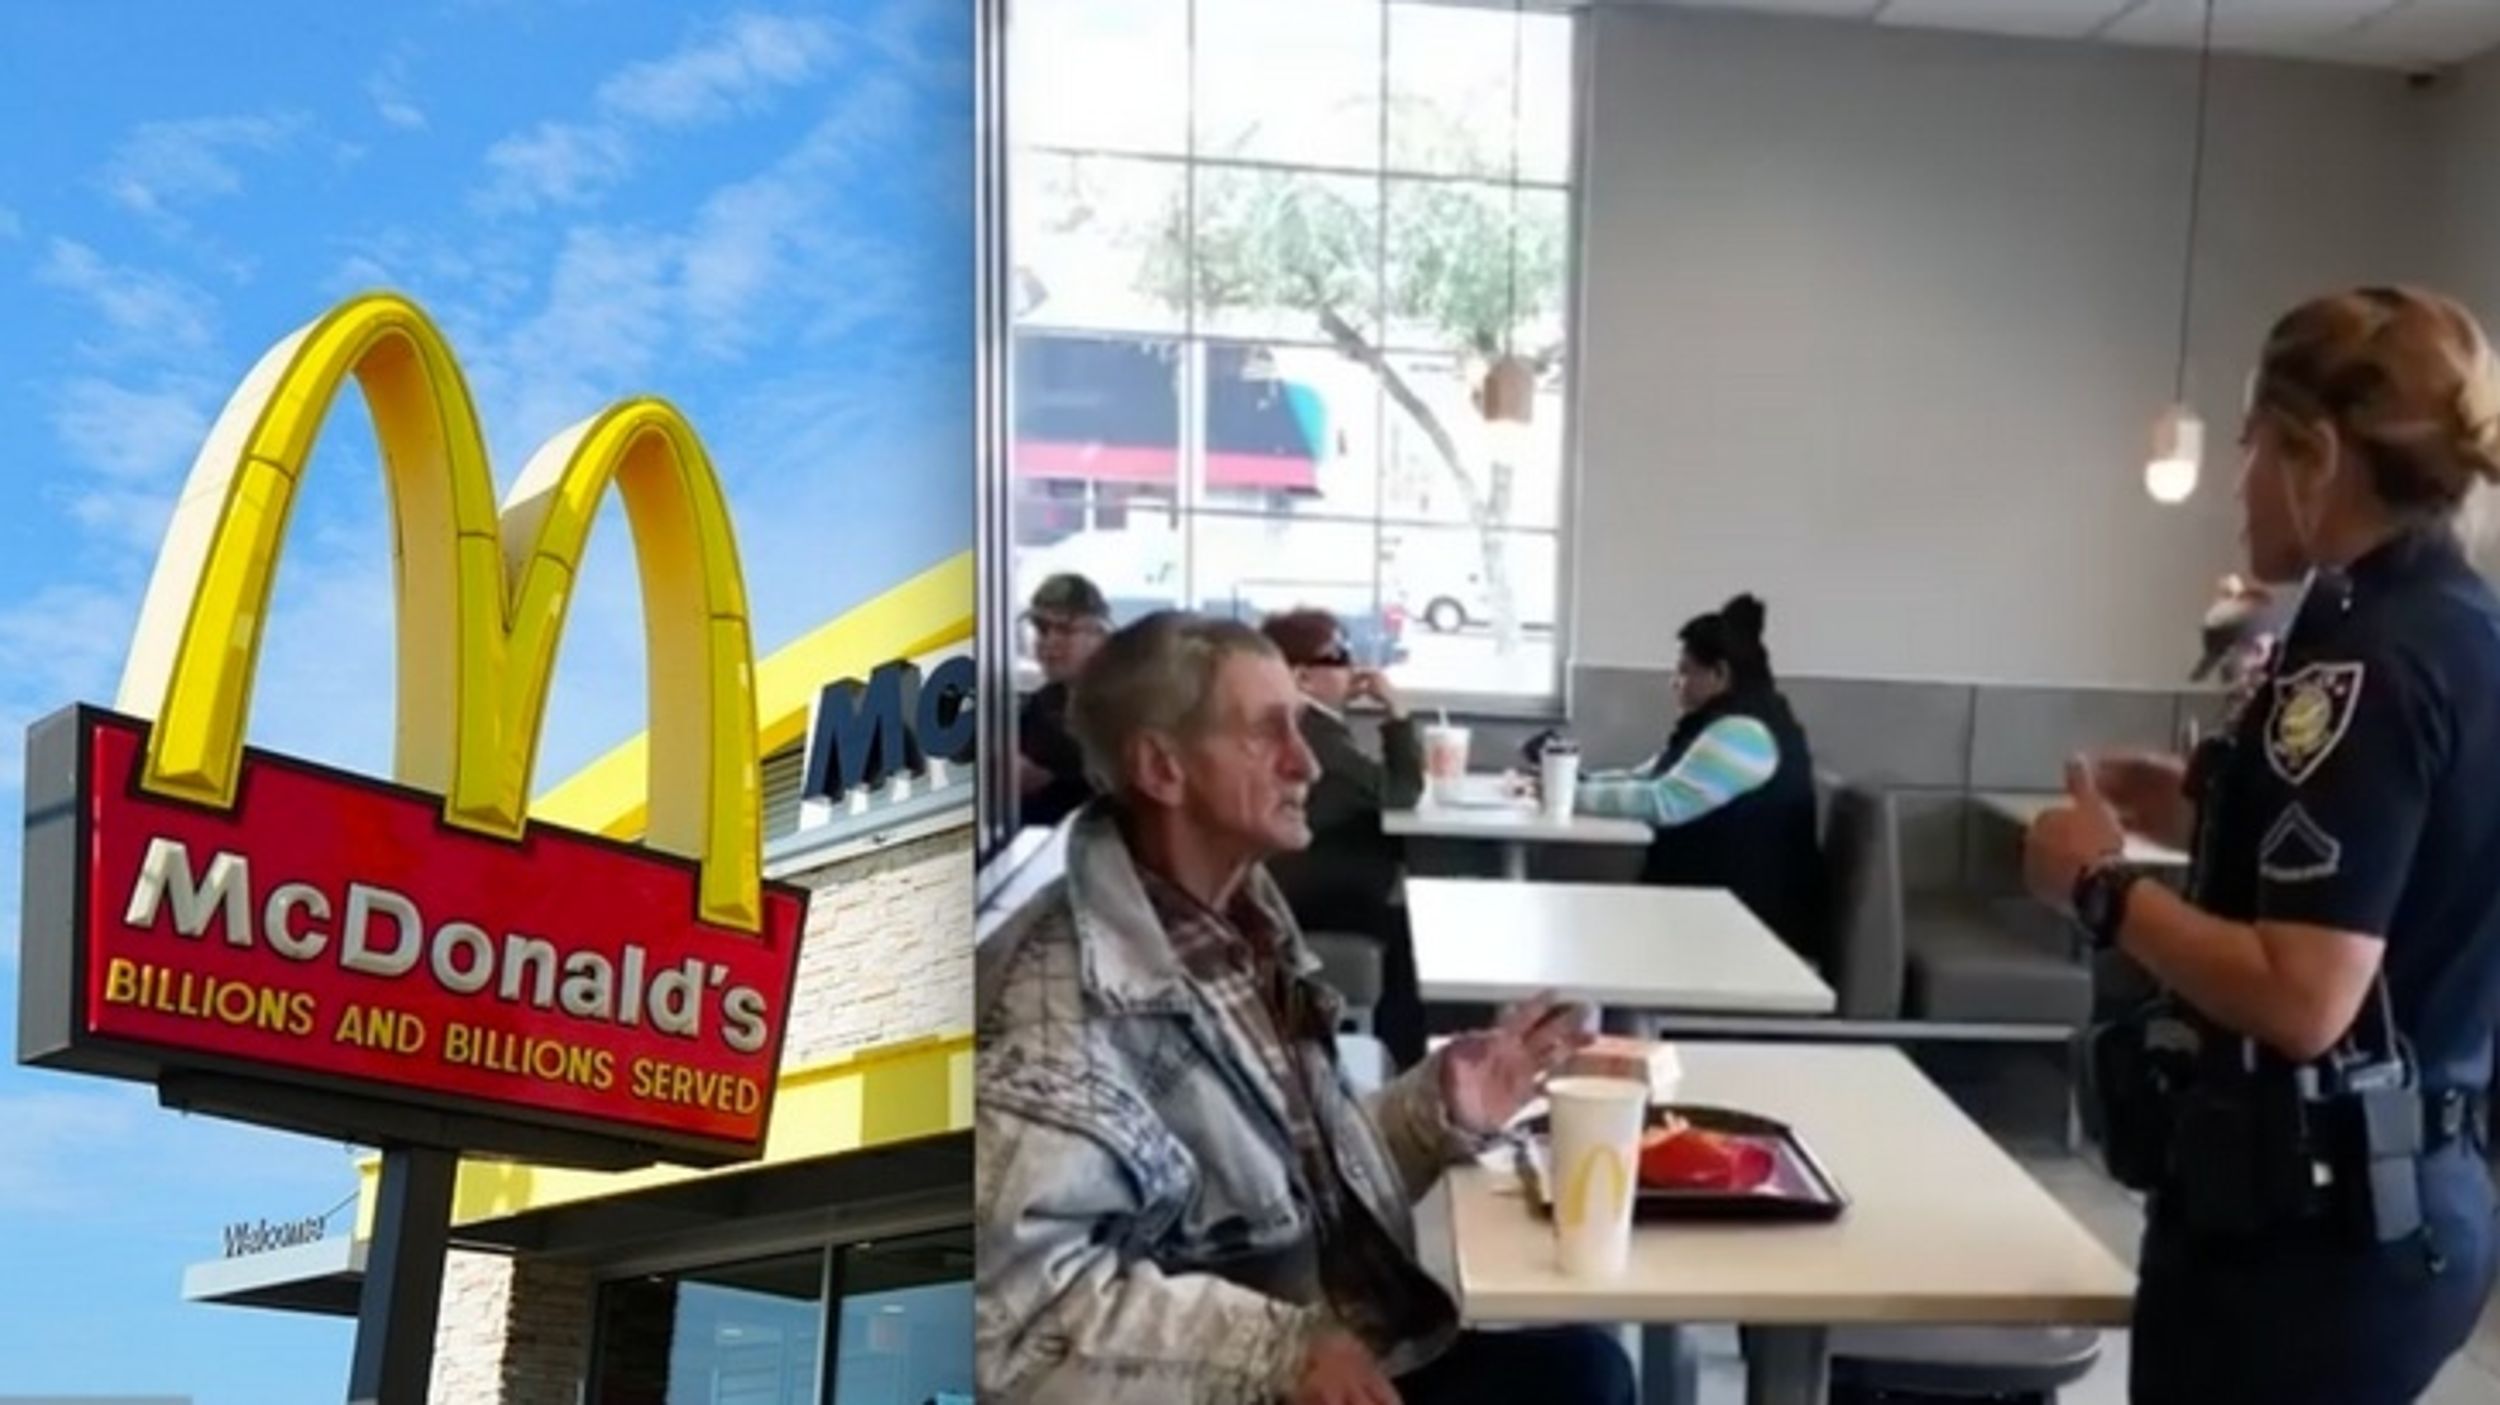 Yossi Gallo Gets Kicked Out of McDonald's After Feeding a Homelss Man